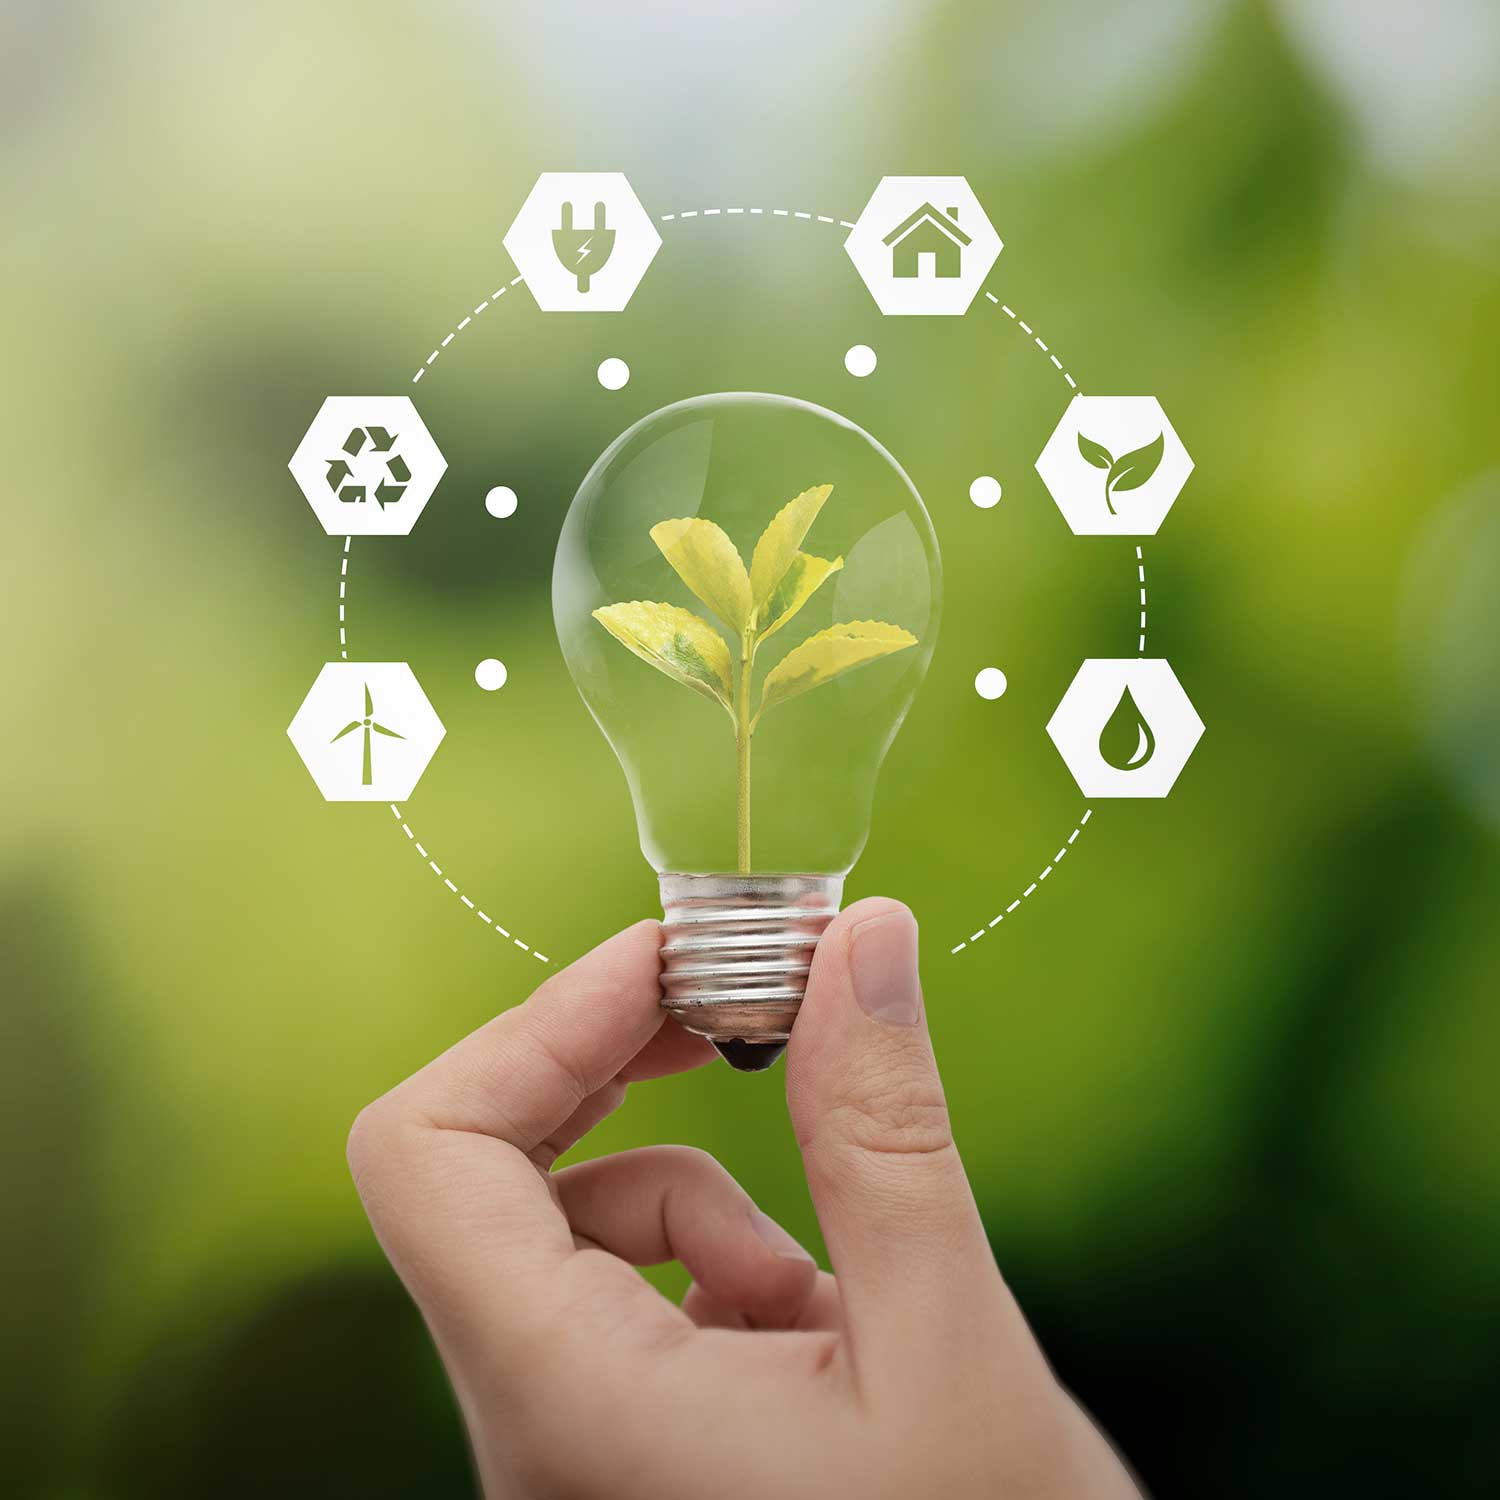 illustration of green energy, lightbulb with plant and clean energy symbols